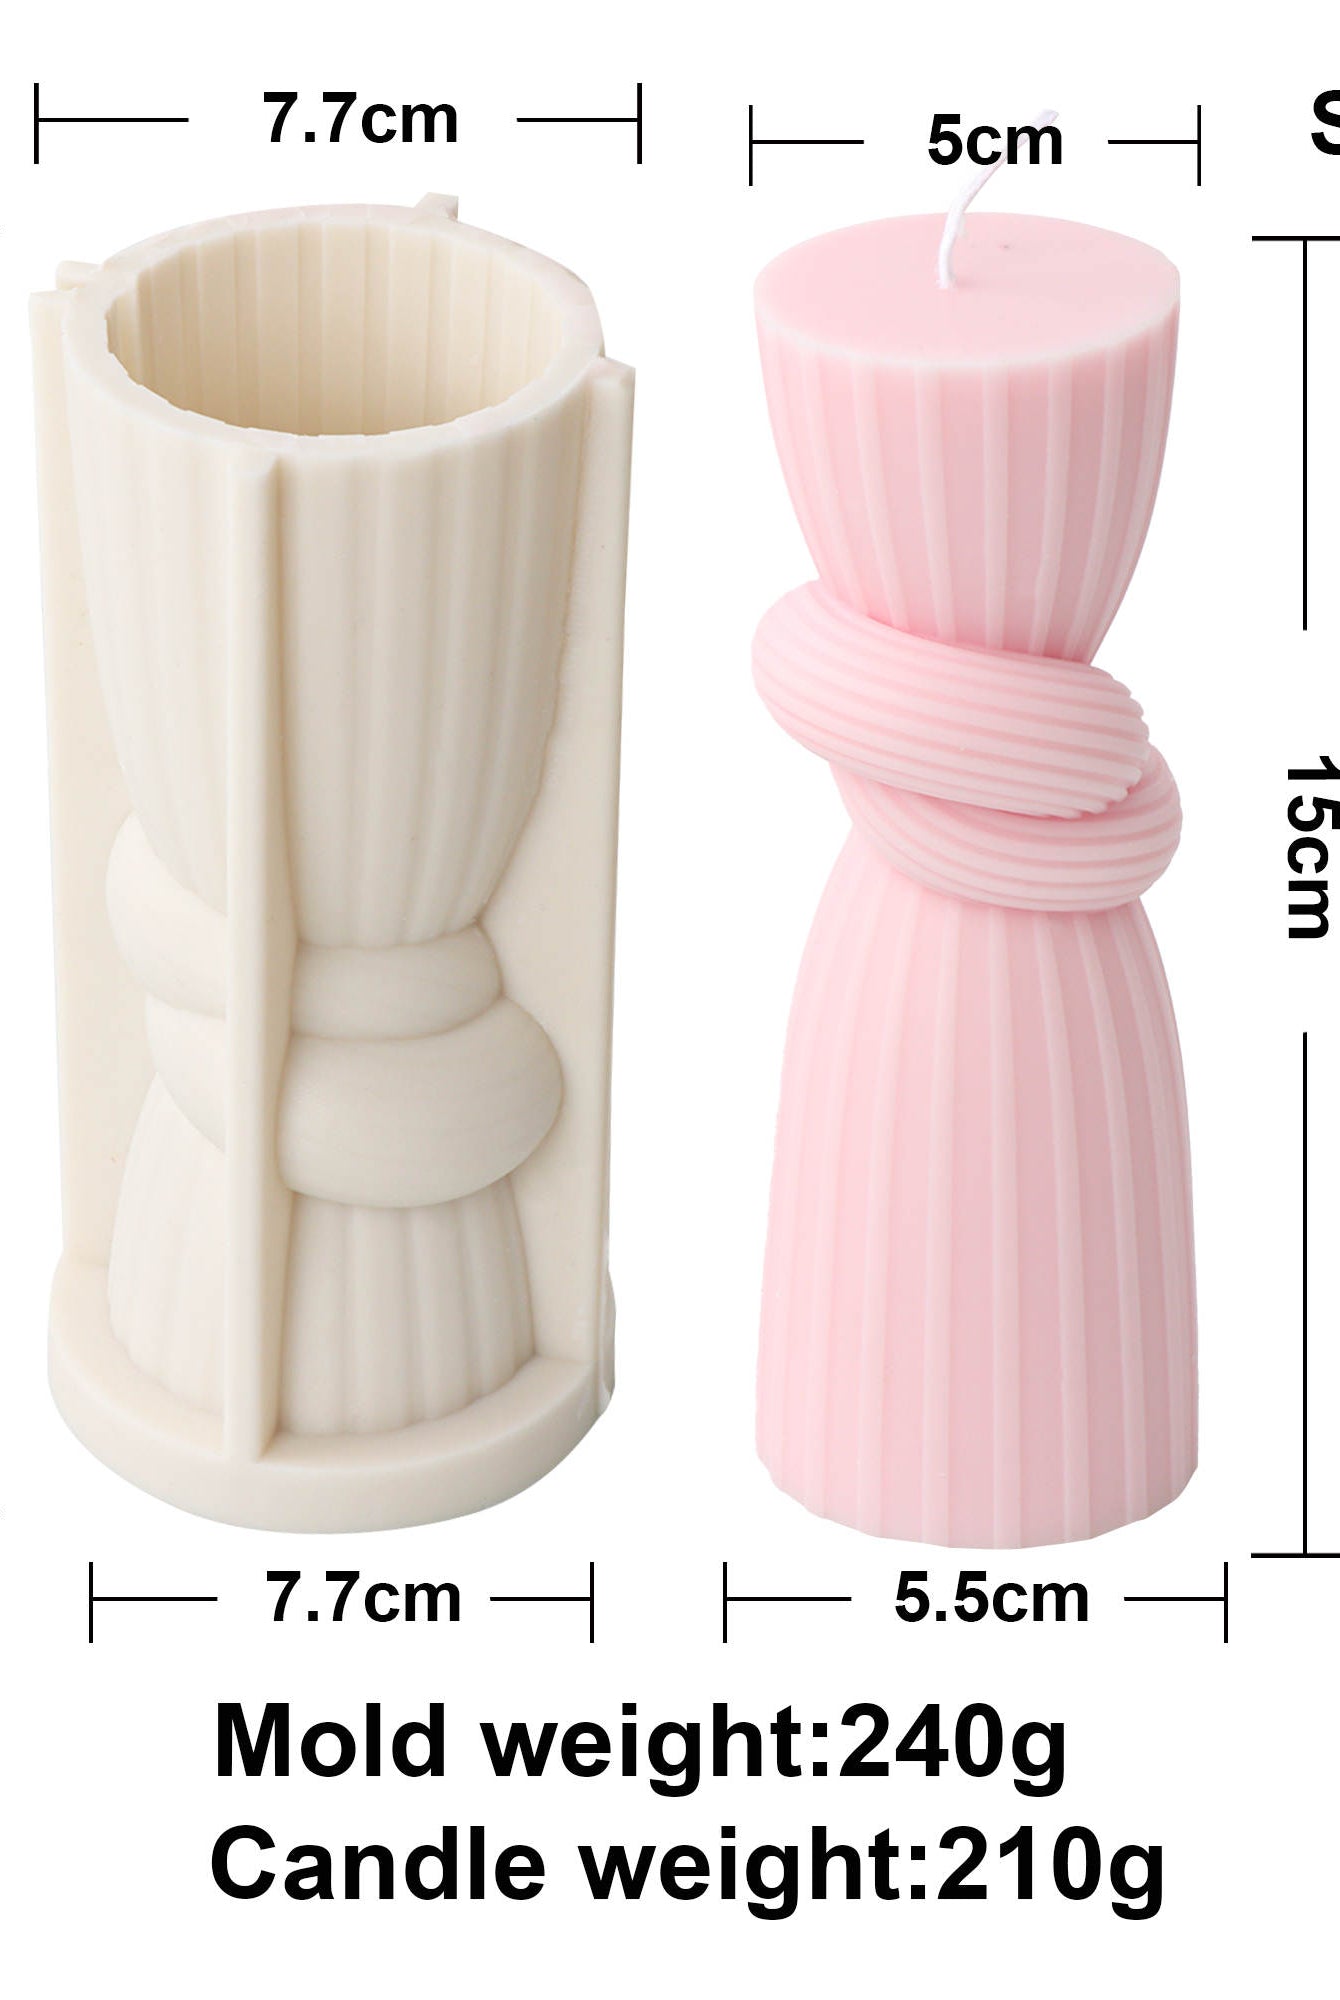 Tie the Knot Pillar Candle Mould 4 - Silicone Mould, Mold for DIY Candles. Created using candle making kit with cotton candle wicks and candle colour chips. Using soy wax for pillar candles. Sold by Myka Candles Moulds Australia